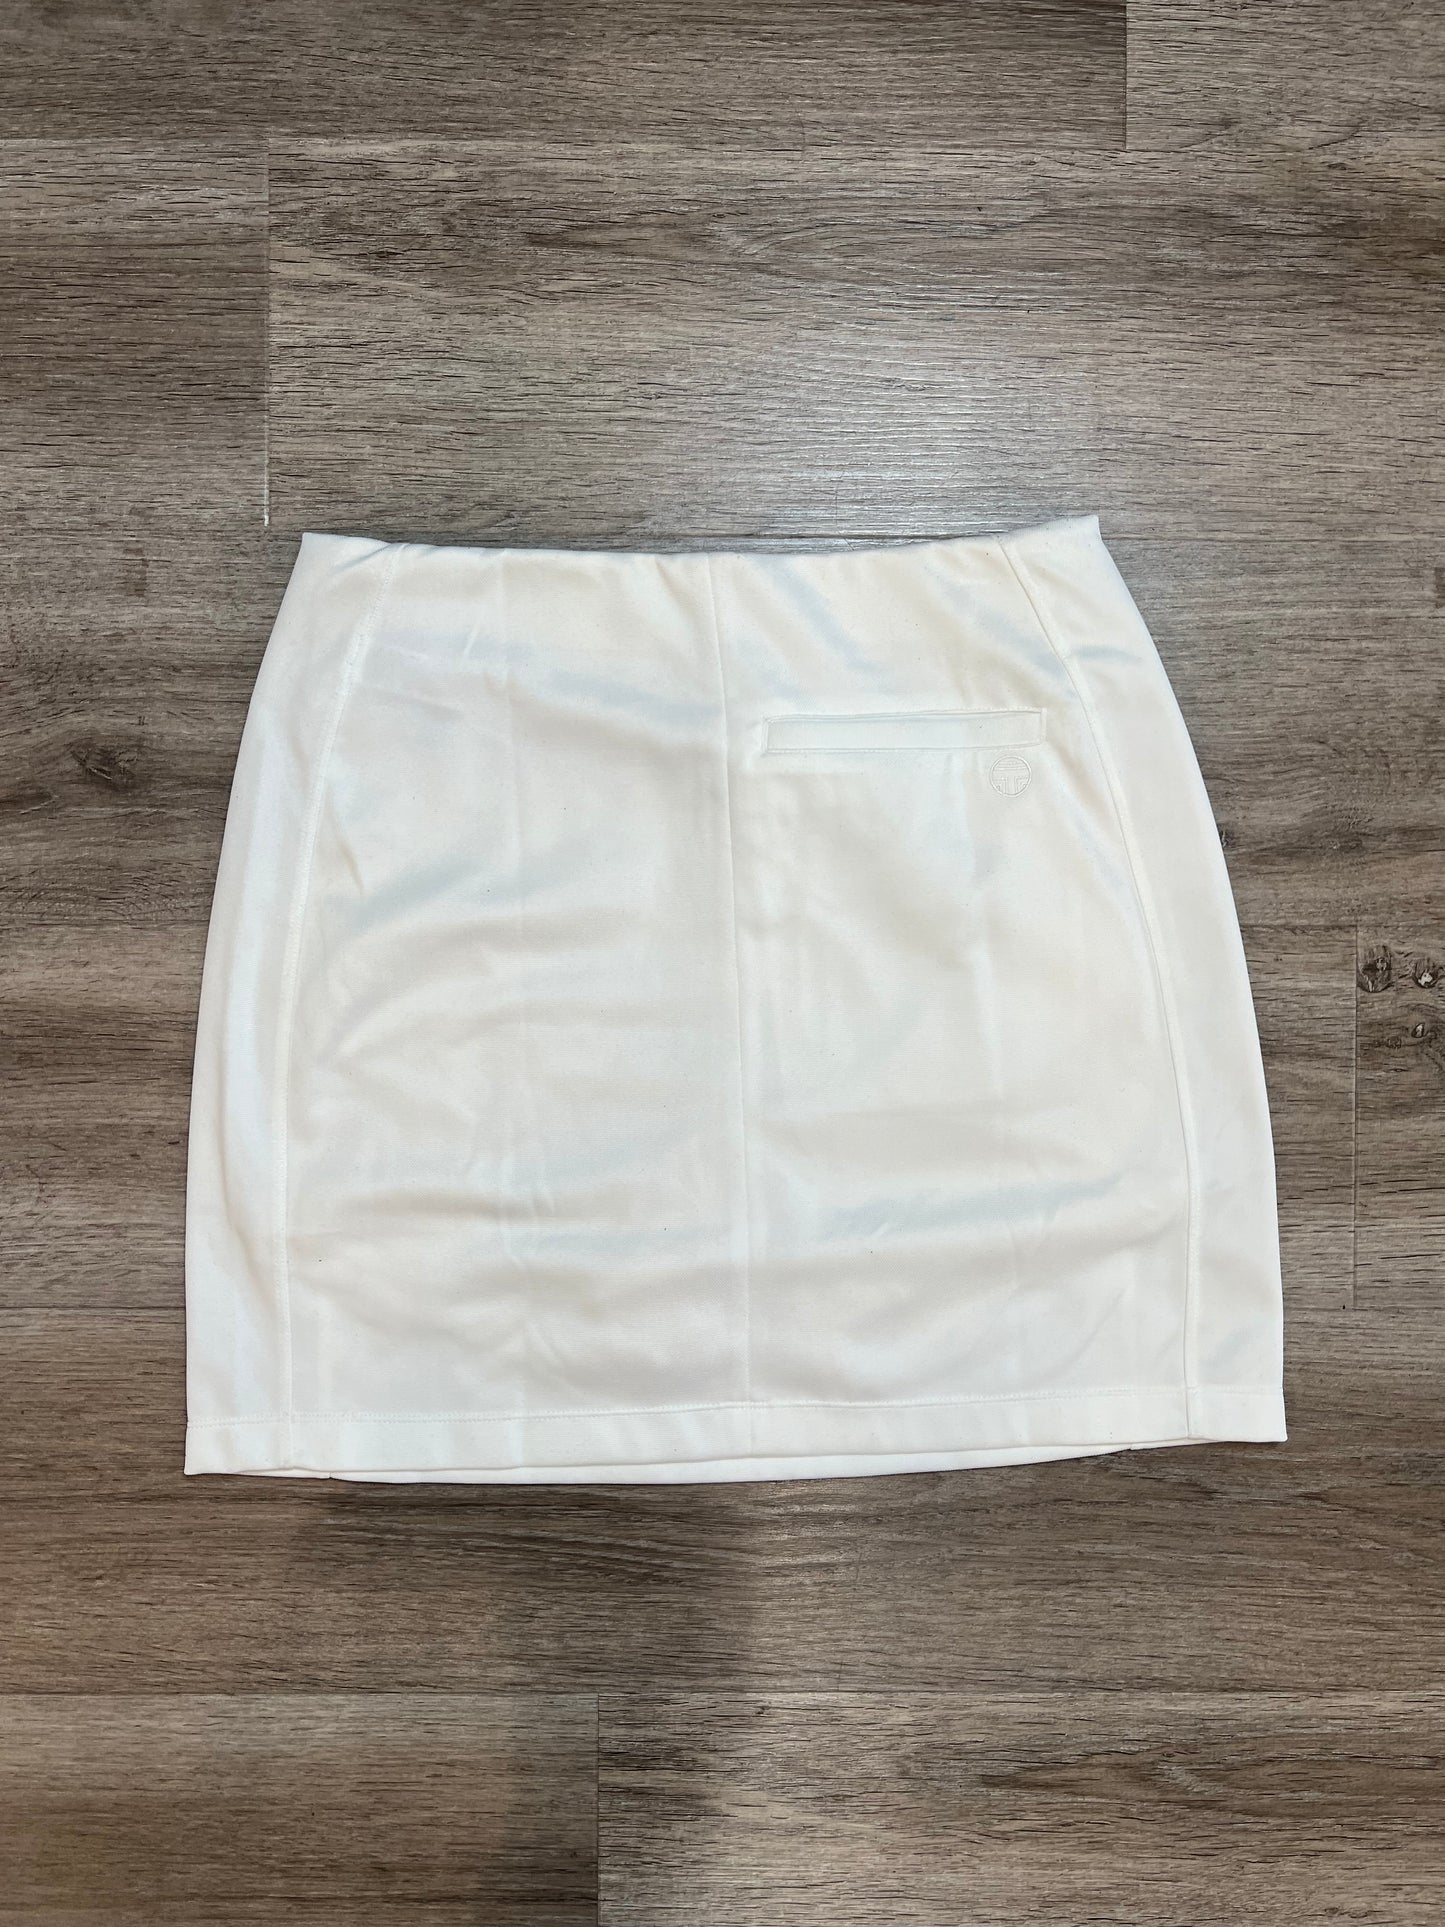 Athletic Skirt Skort By Tory Burch  Size: S